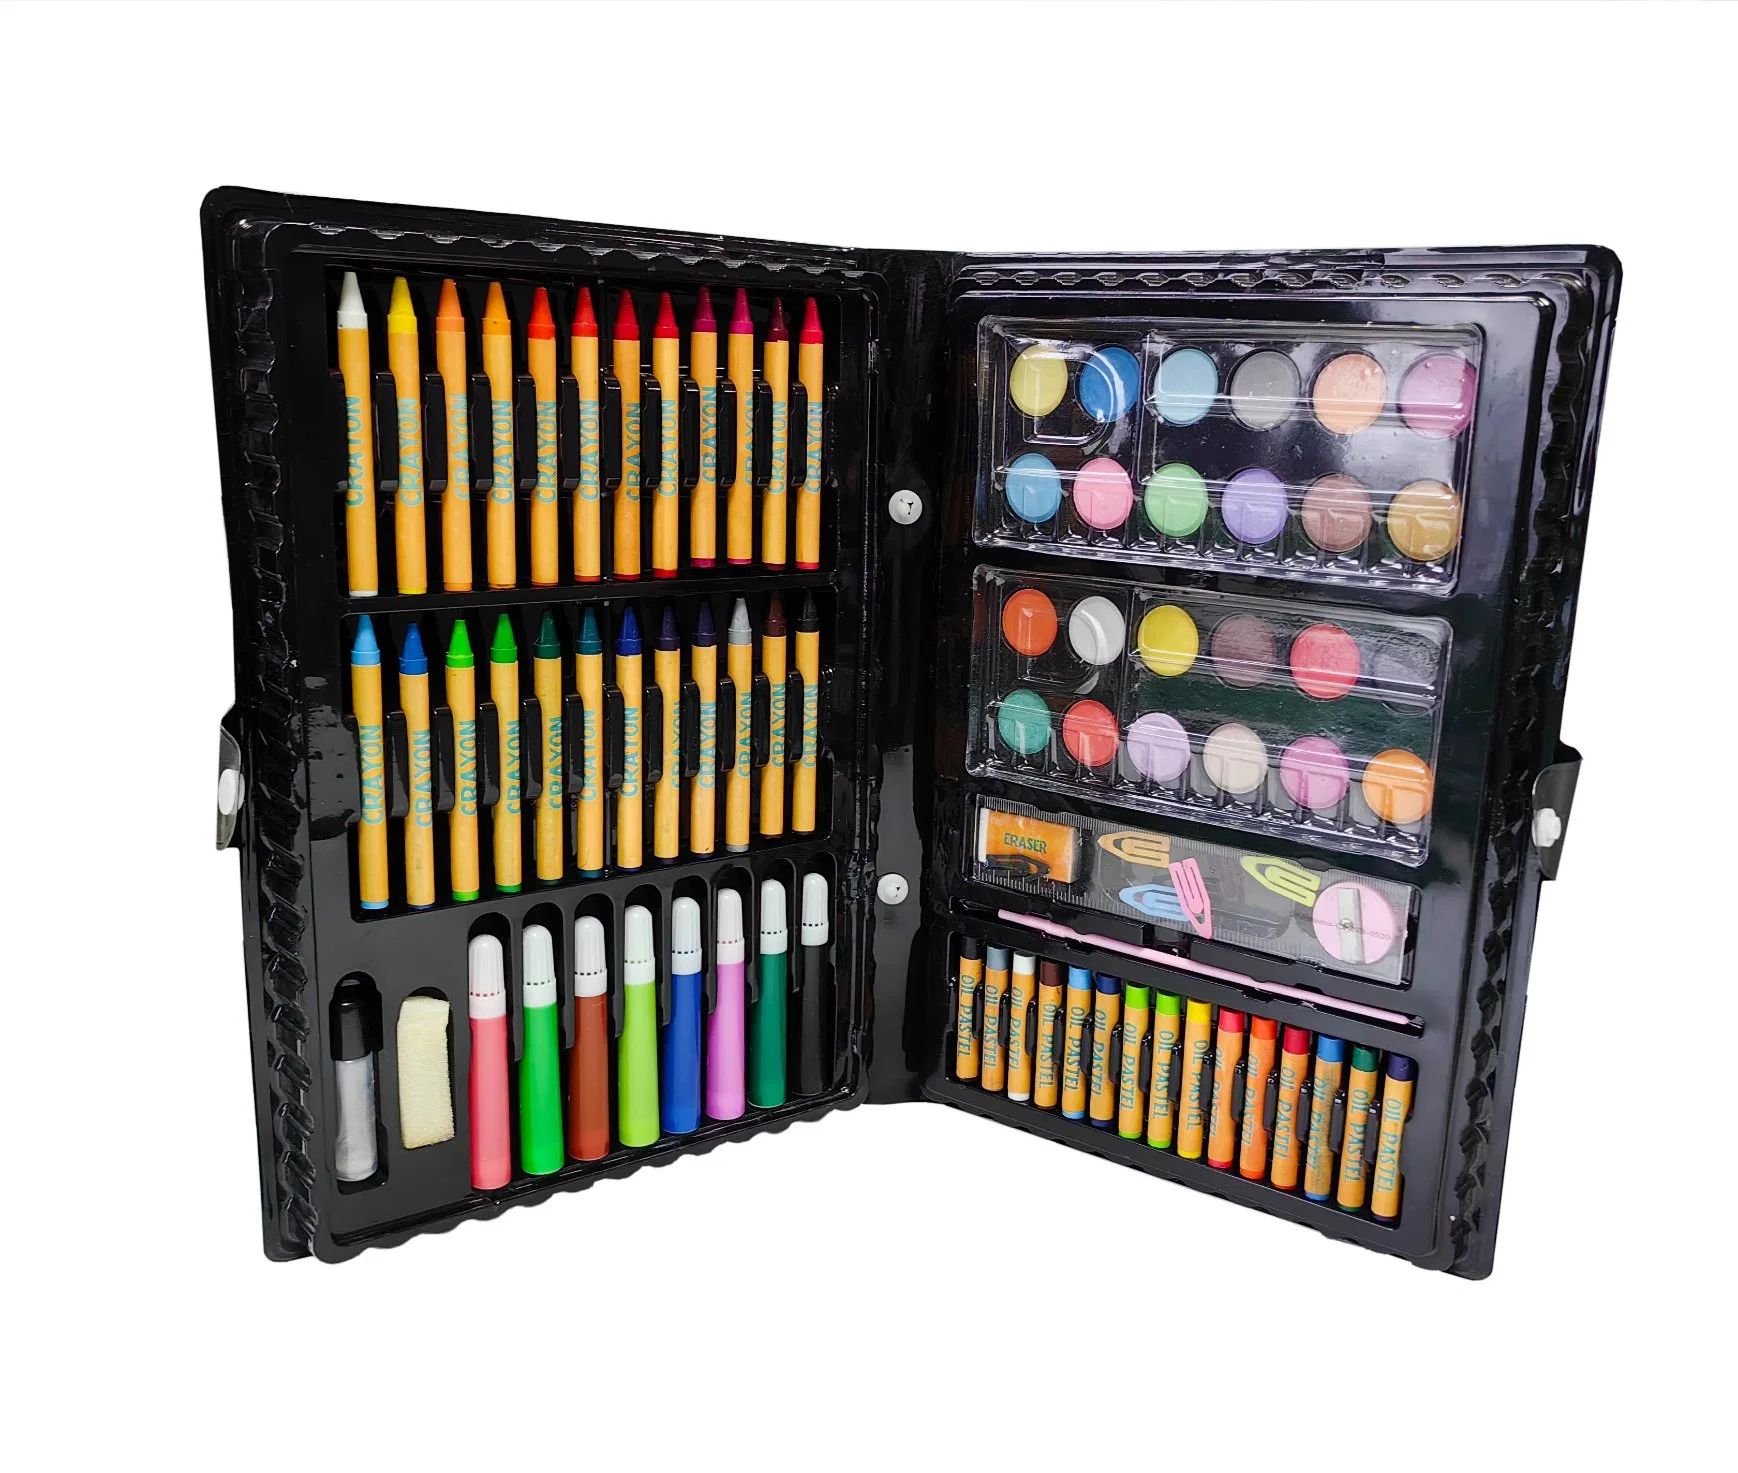 Walgreen 85 PCS Superior USA ASTM Quality Children Drawing Painting Set Crayons Oil Pastels Markers Stationery Set